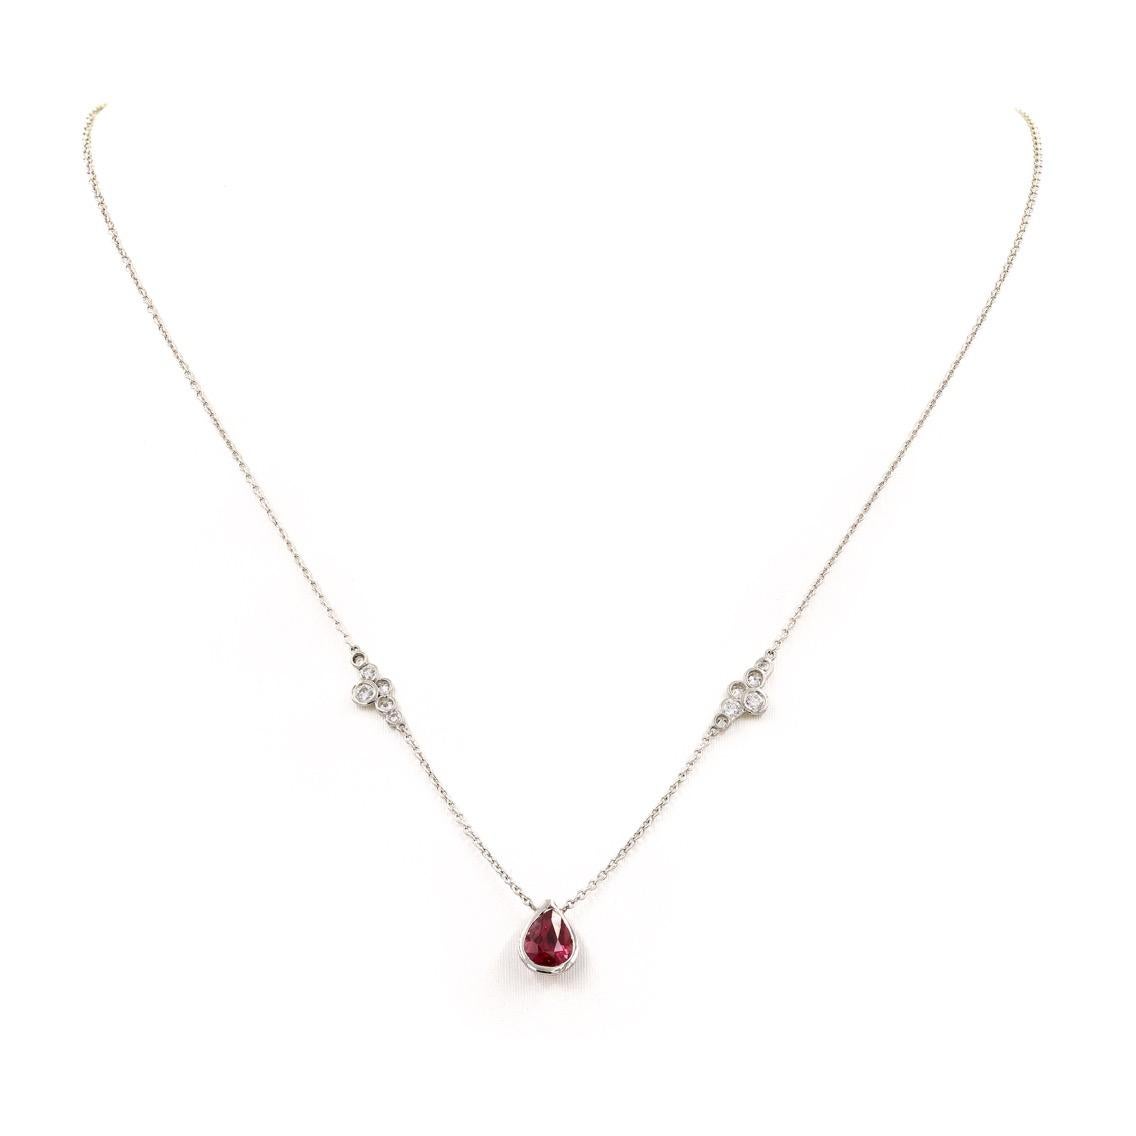 Lester Lampert Original Pirouette Diamond Necklace with Pear Shape Ruby Center im Zustand „Neu“ in Chicago, IL